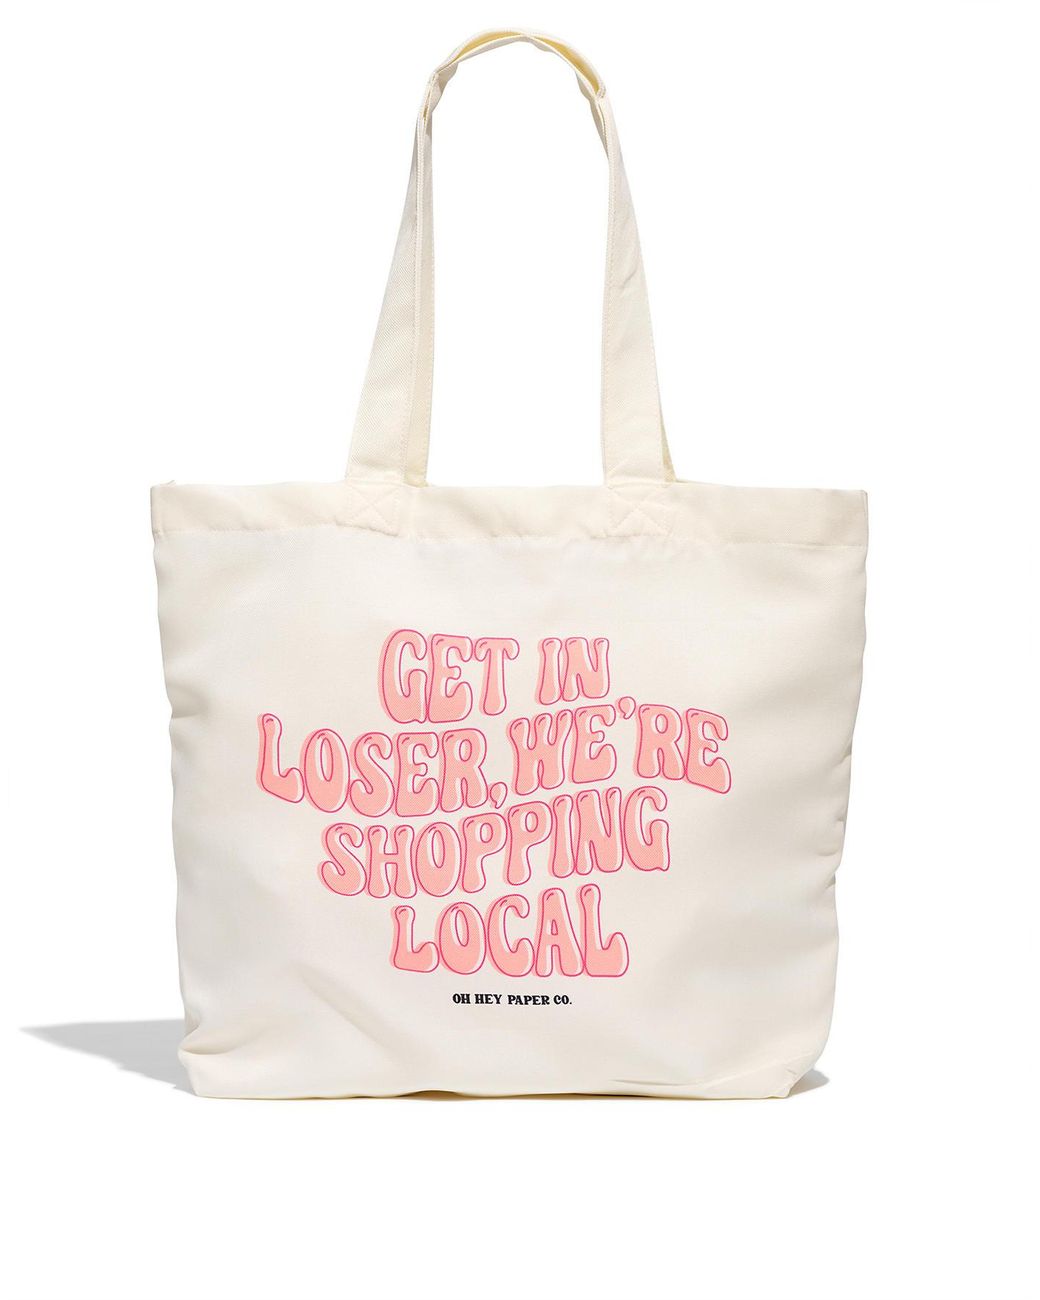 MW Oh Hey Paper Co. Shopping Local Tote Bag in Pink